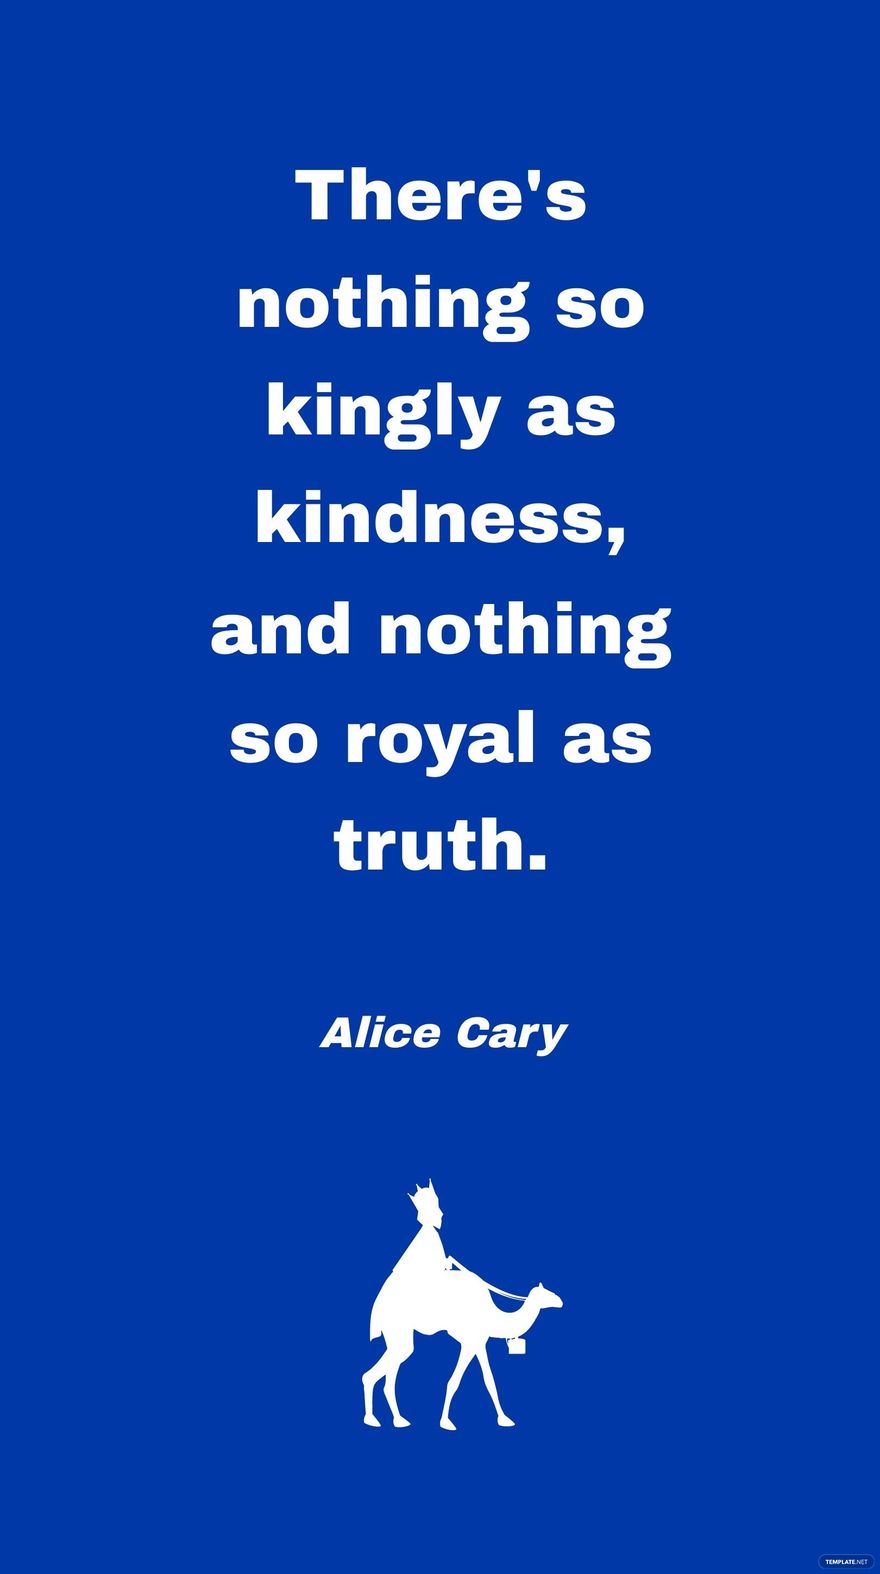 Alice Cary - There's nothing so kingly as kindness, and nothing so royal as truth.